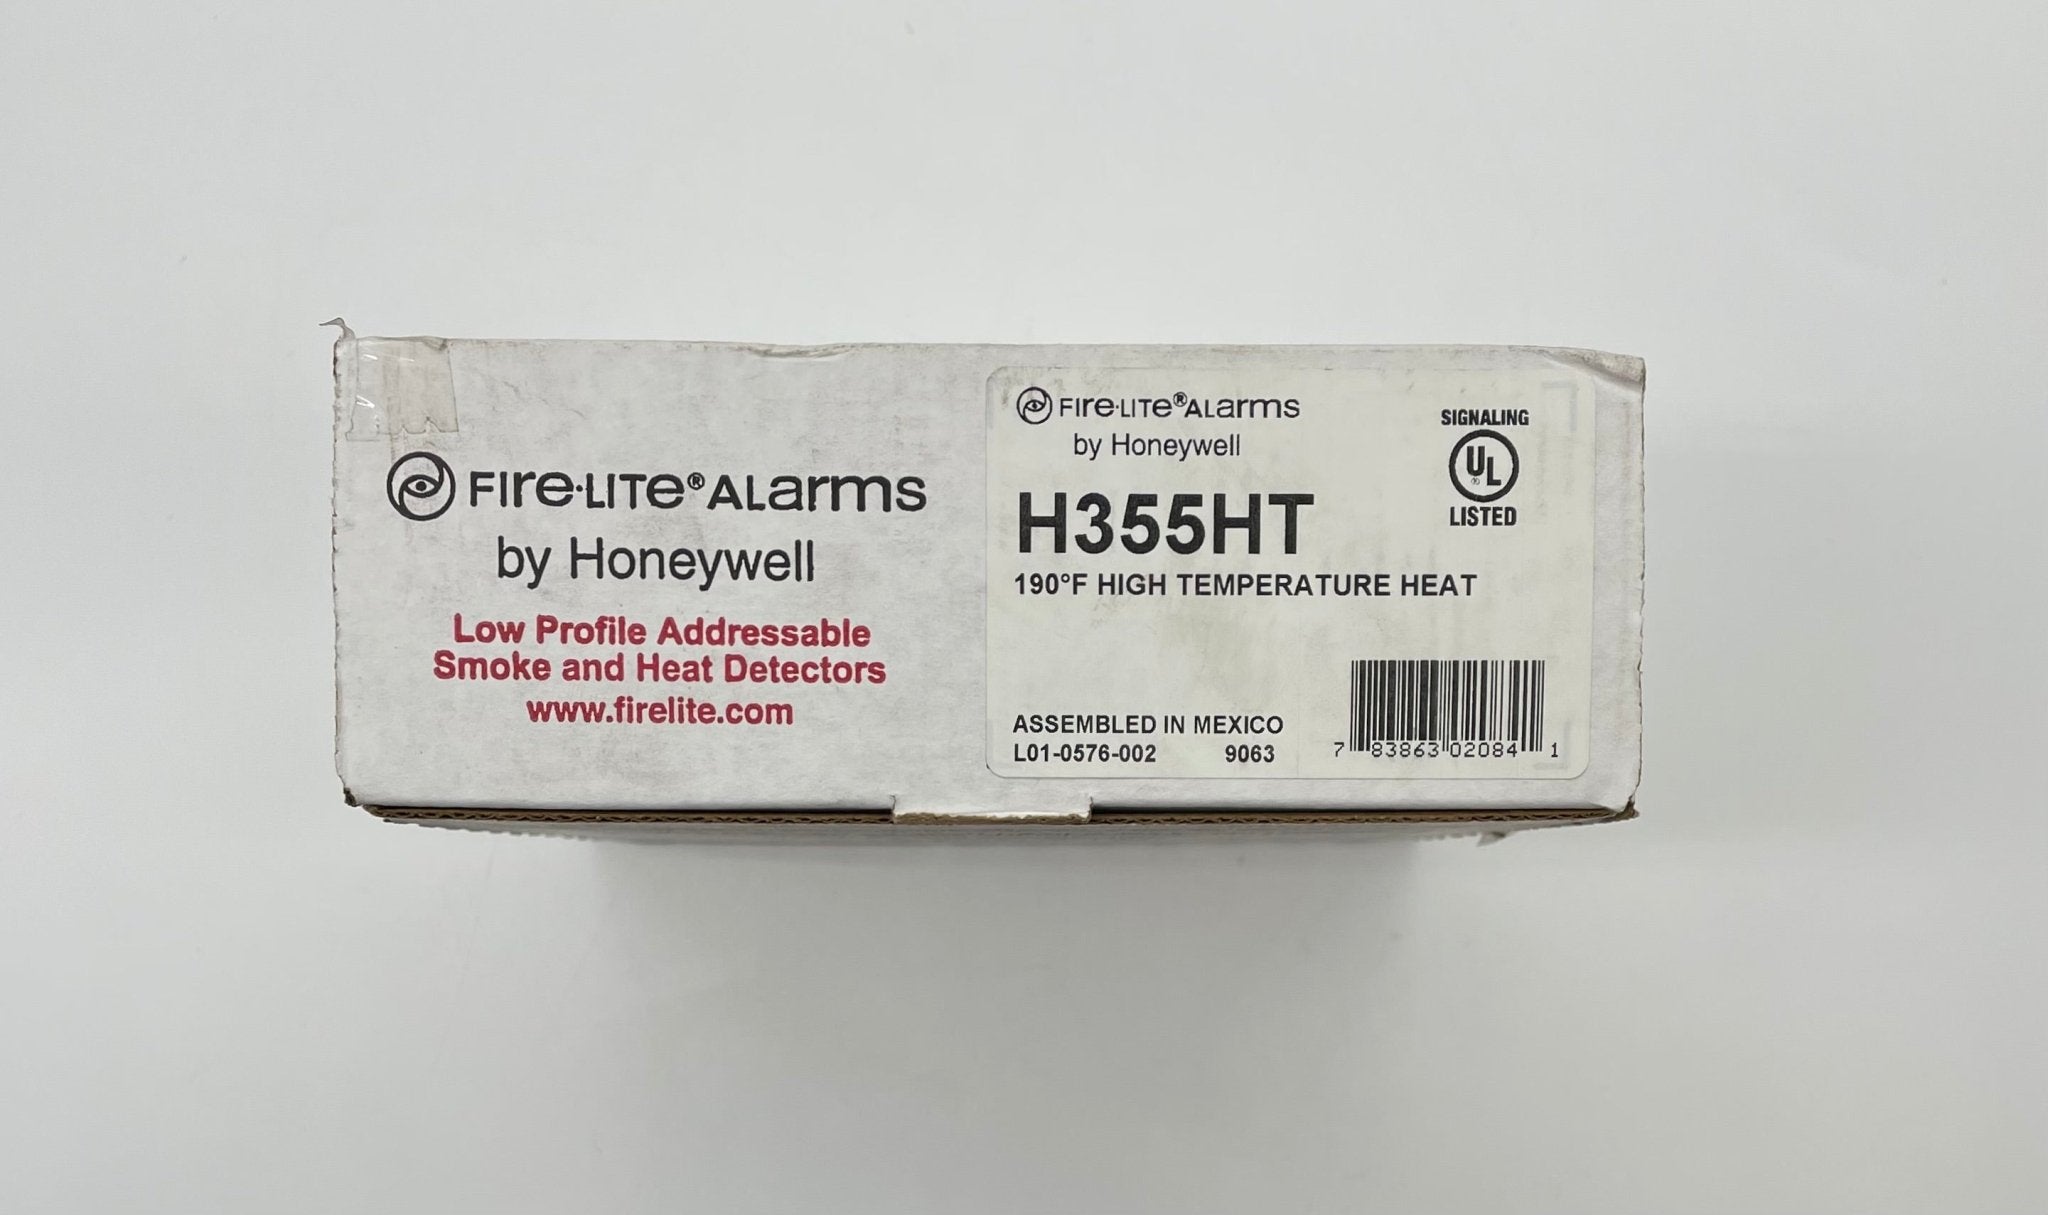 Firelite H355HT (Discontinued, Last Units in Stock) - The Fire Alarm Supplier